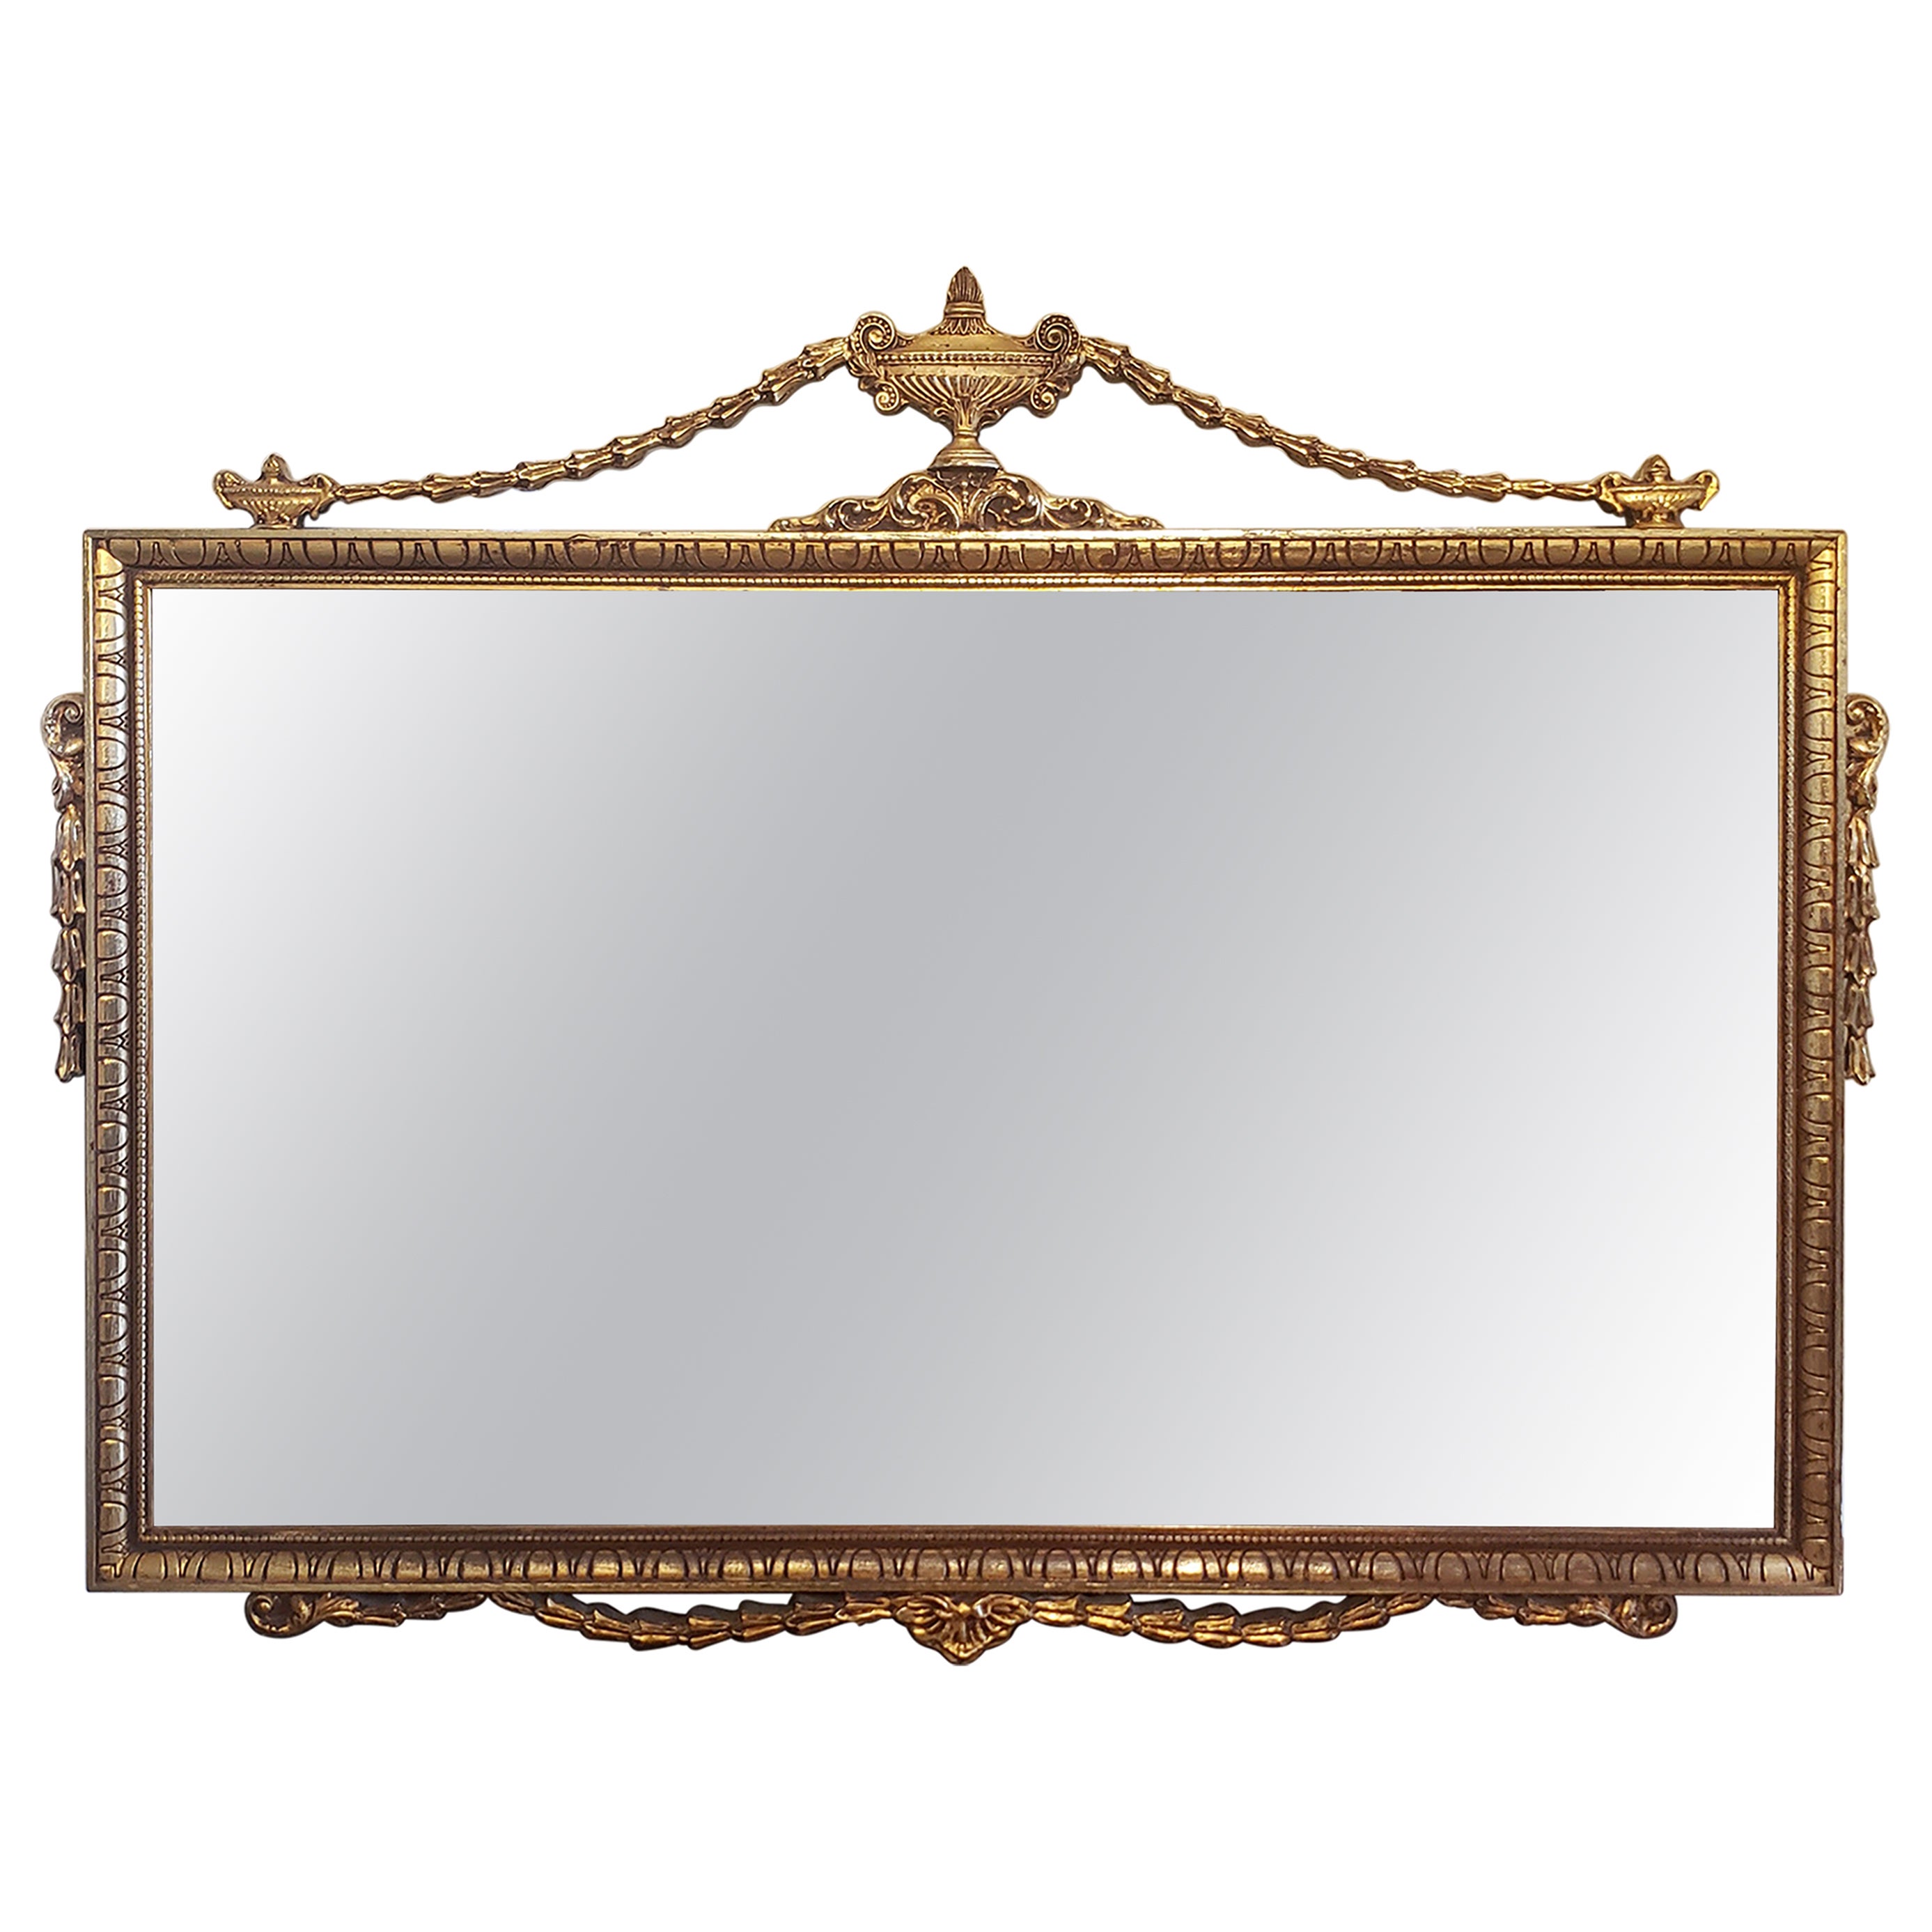 Vintage French Giltwood Urns and Laurel Swags Mirror